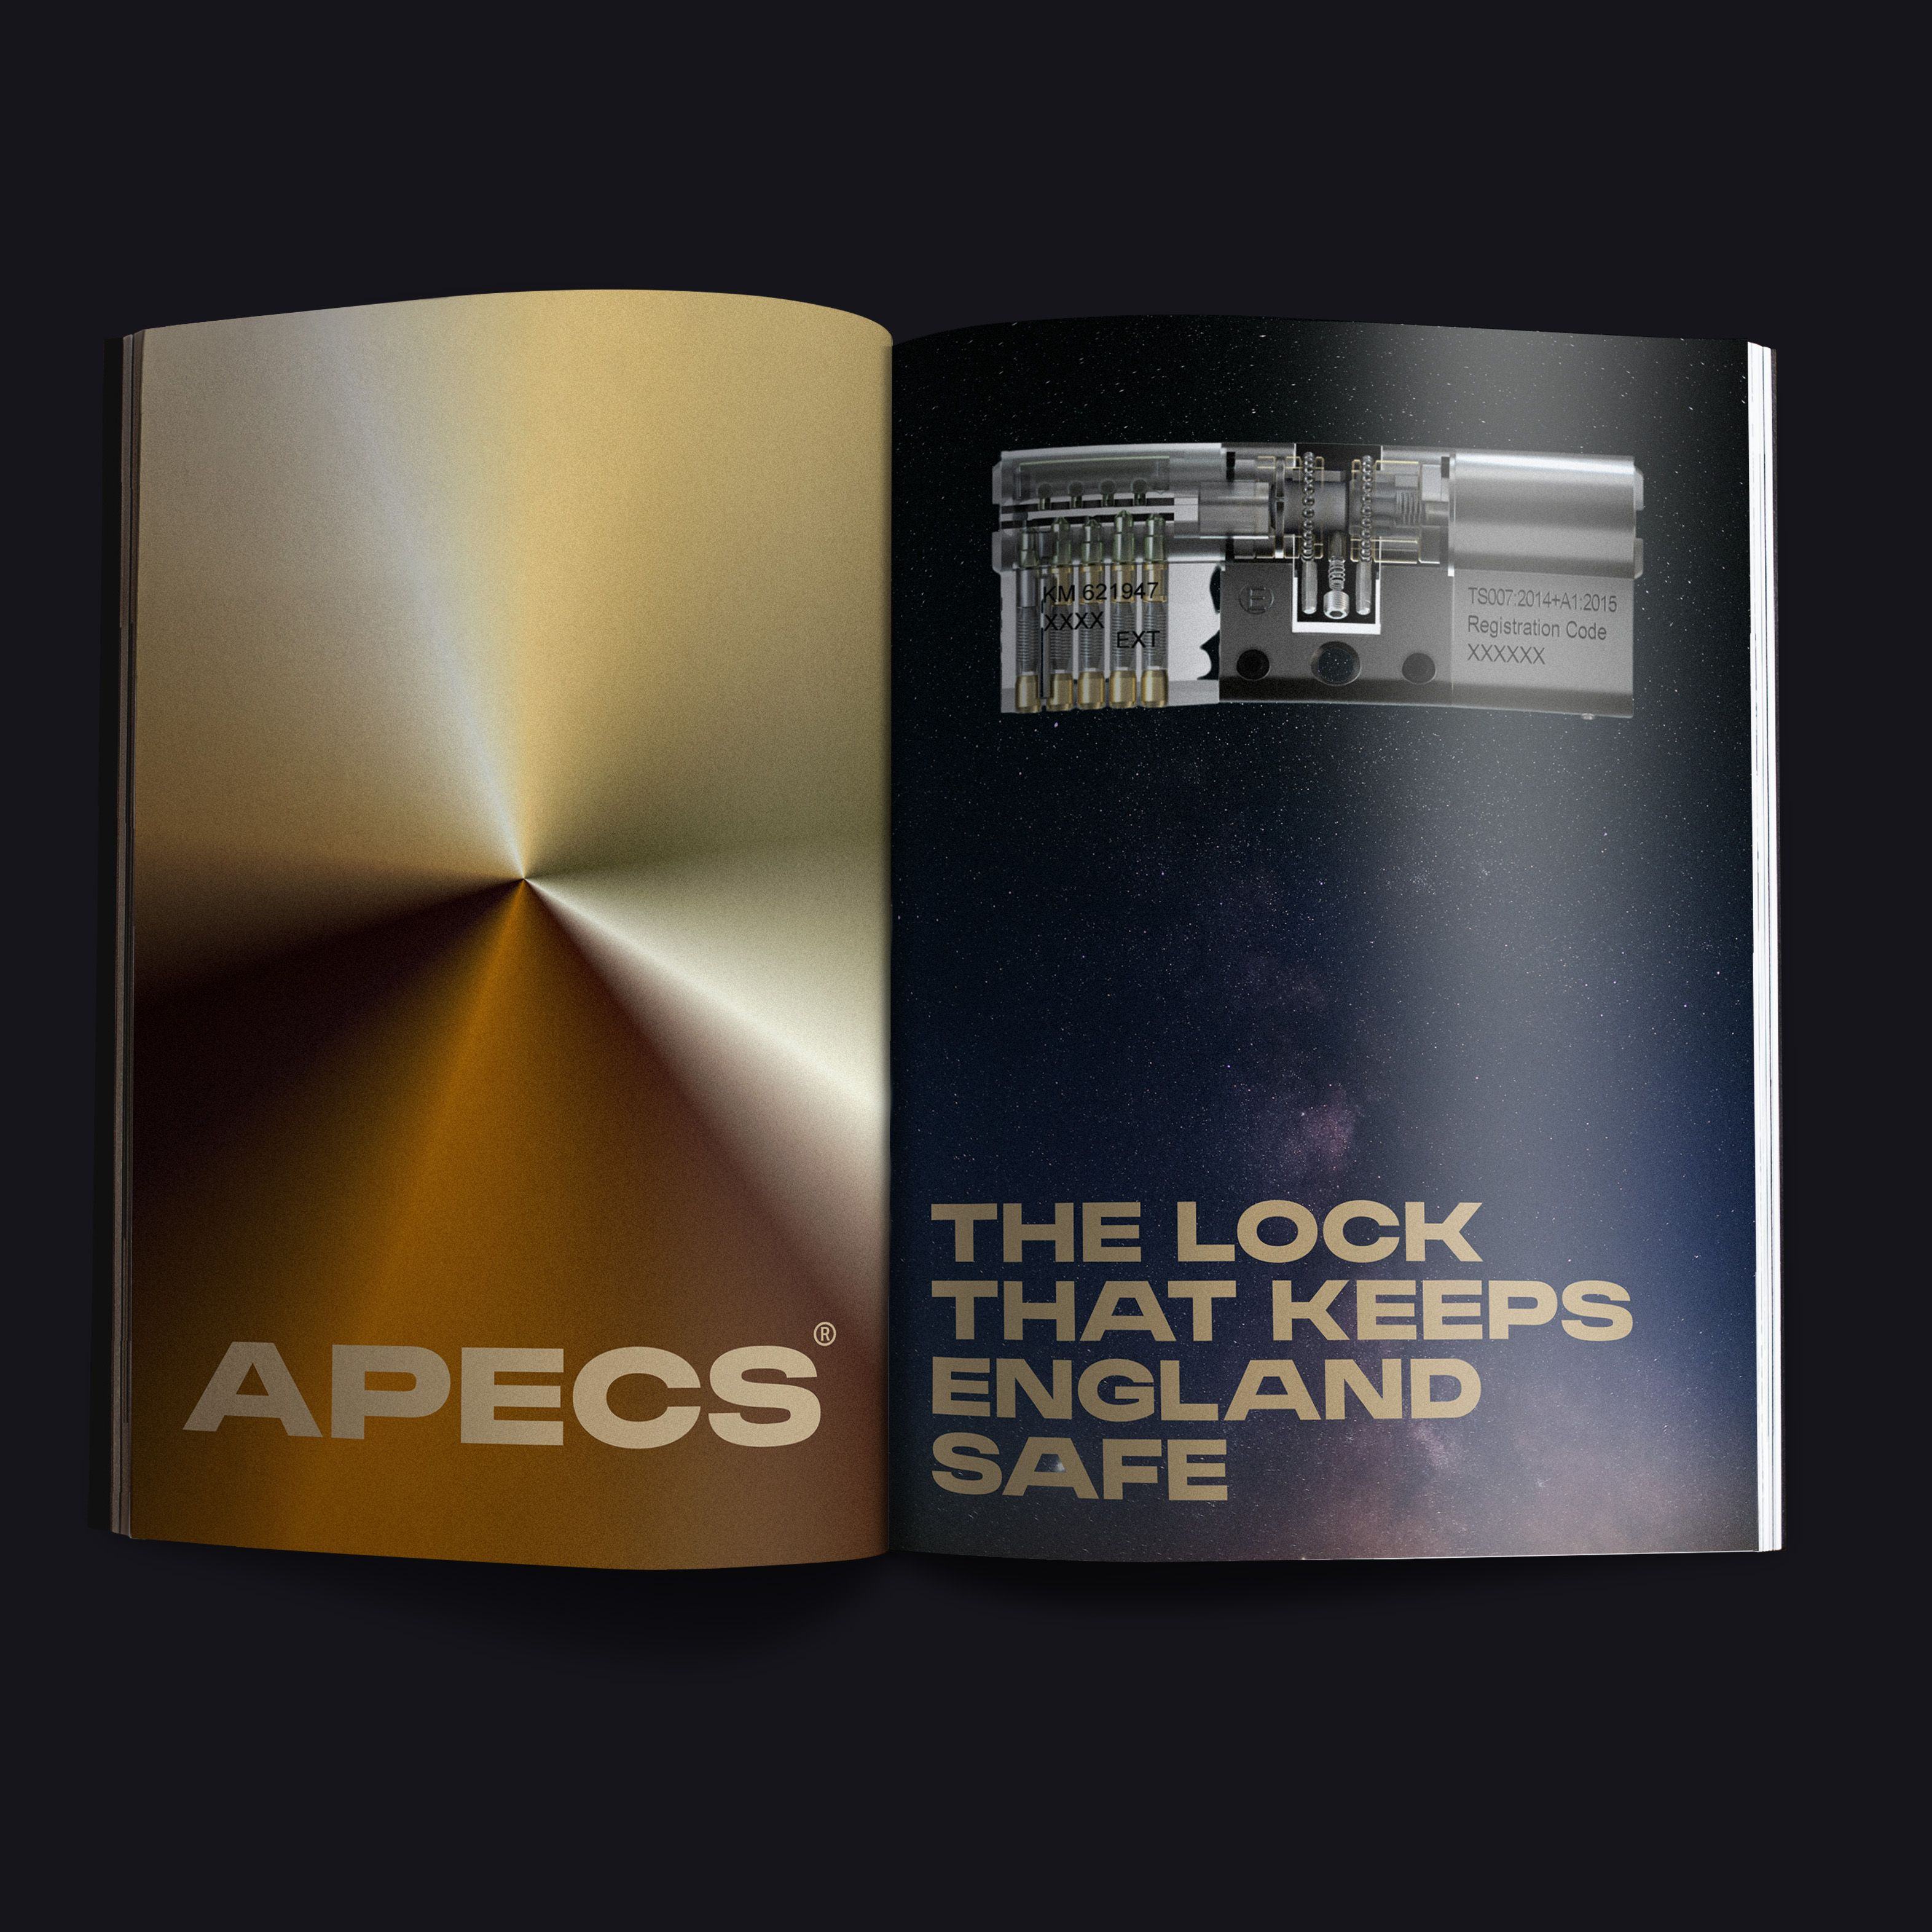 Apecs magazine cover - The Lock that Keeps England Safe